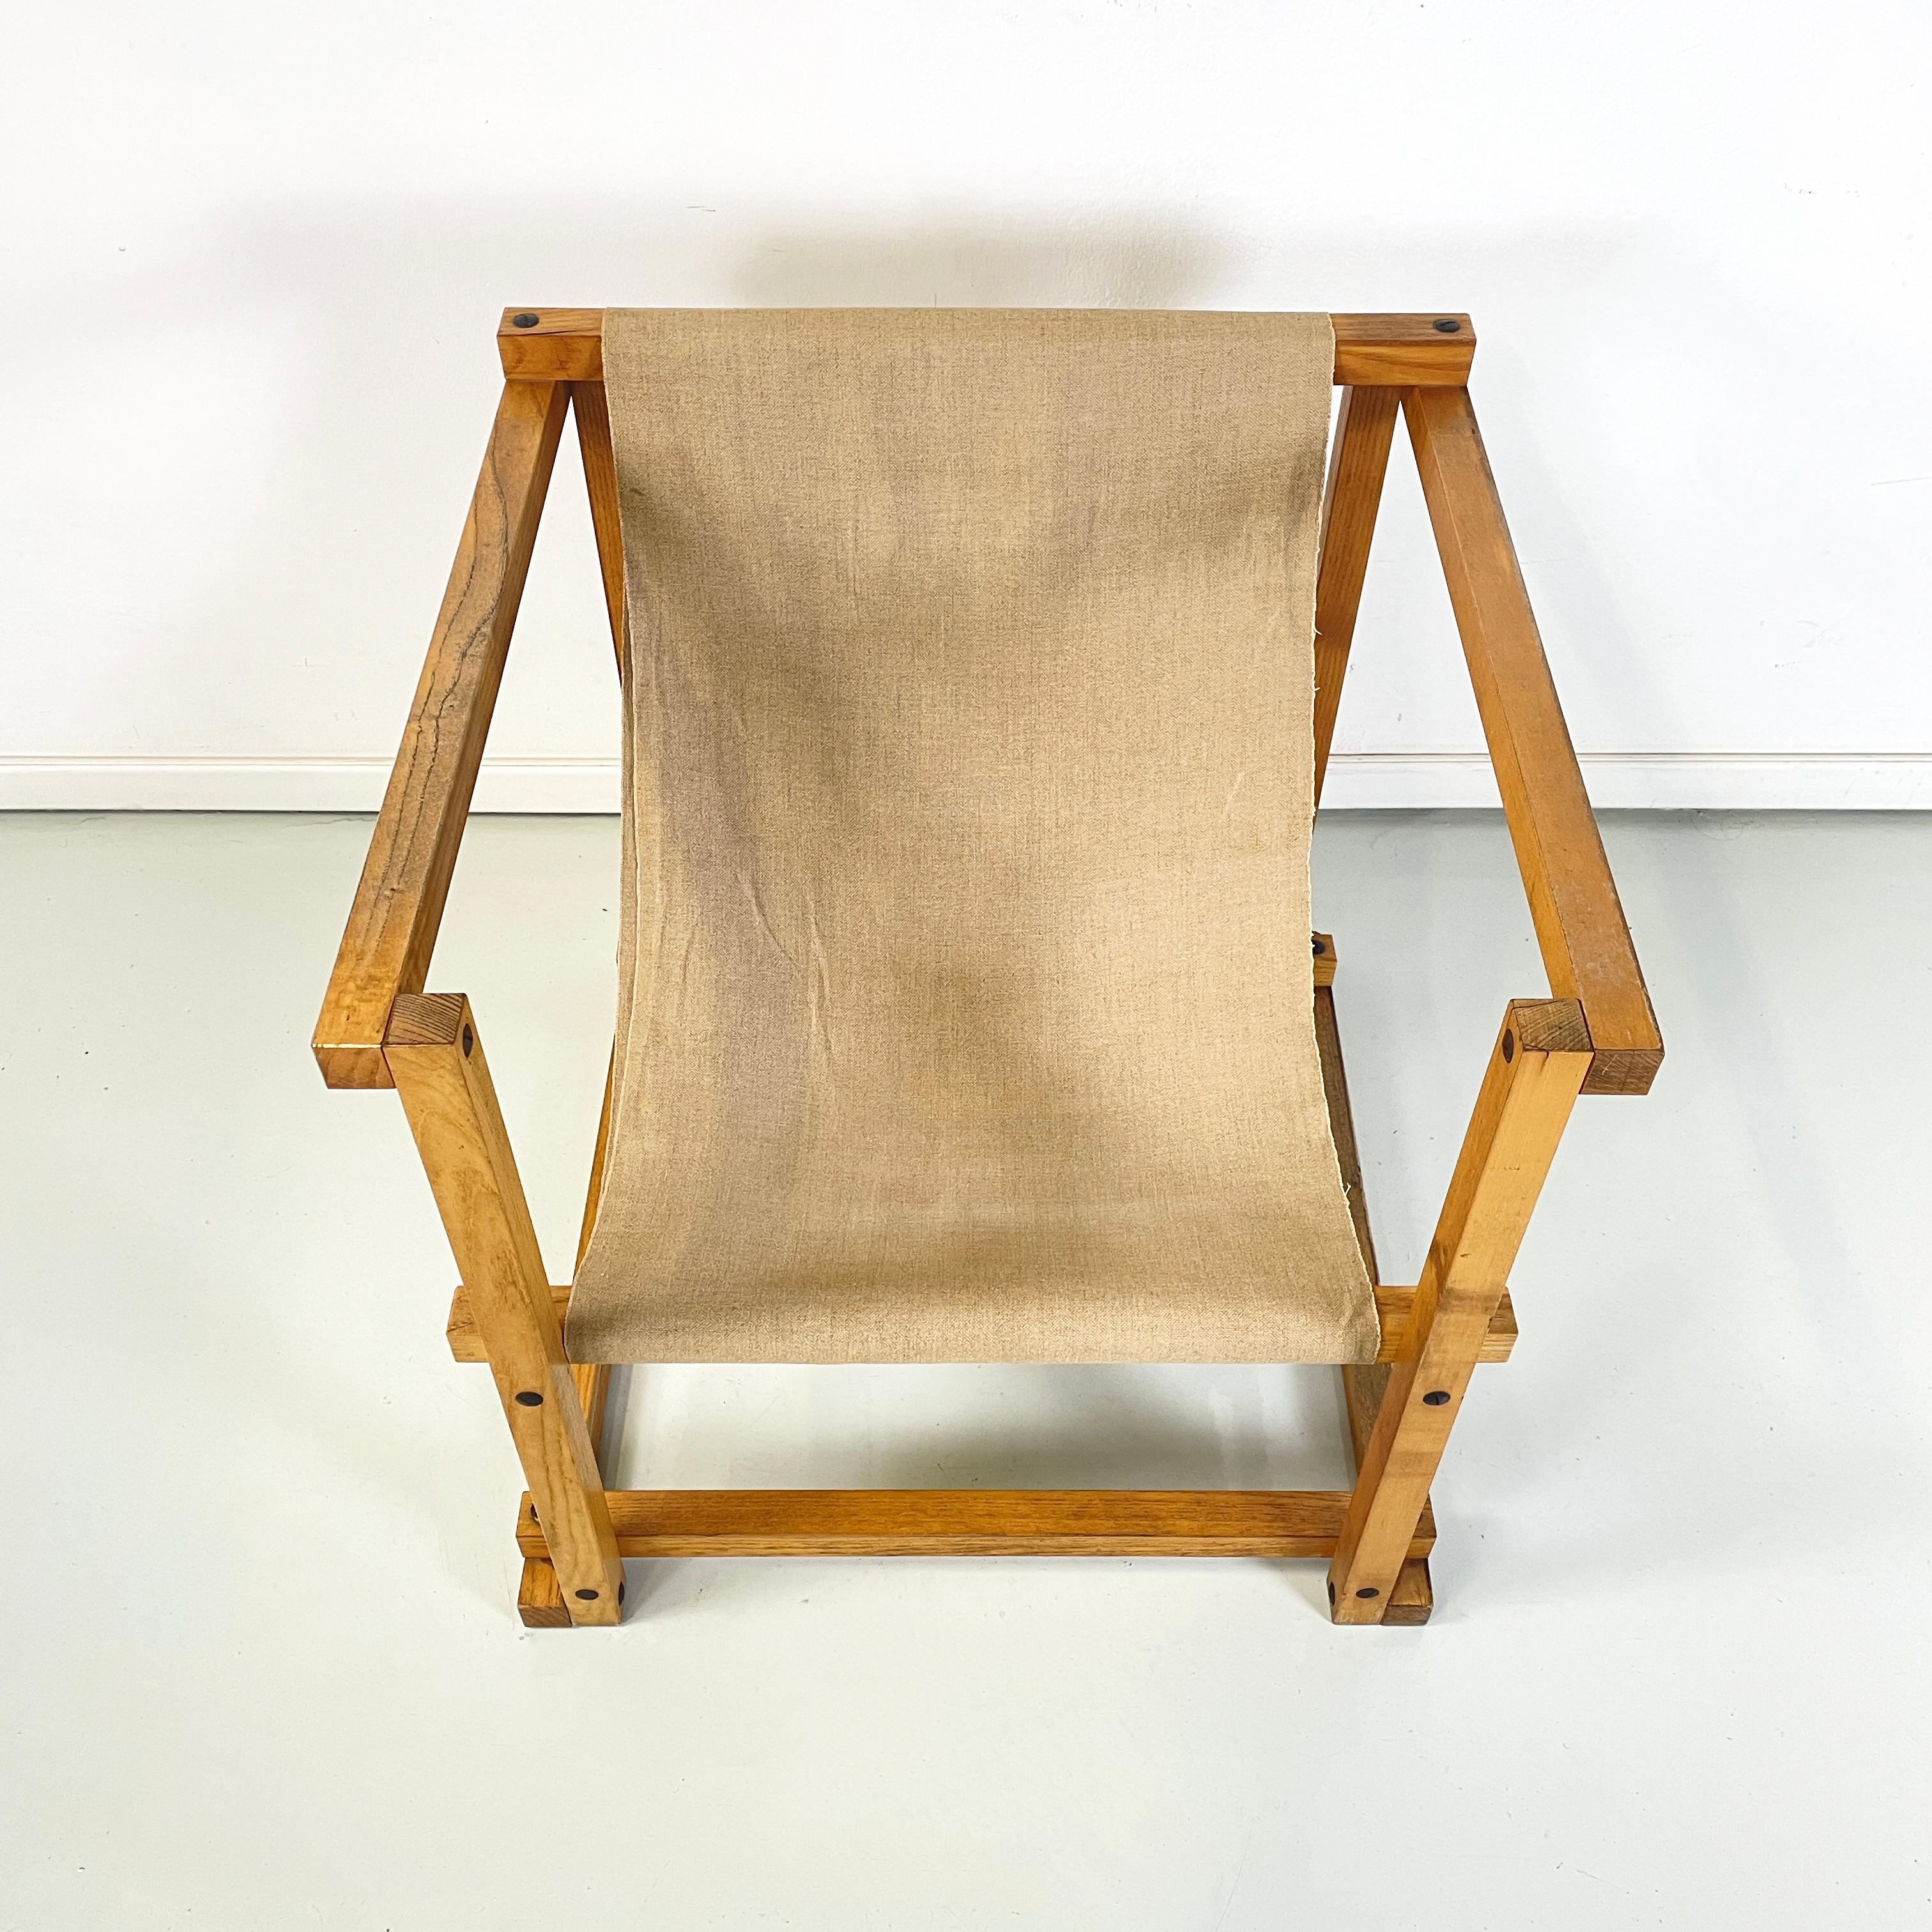 Fabric Italian mid-century modern Wood armchair with beige fabric by Pino Pedano, 1970s For Sale